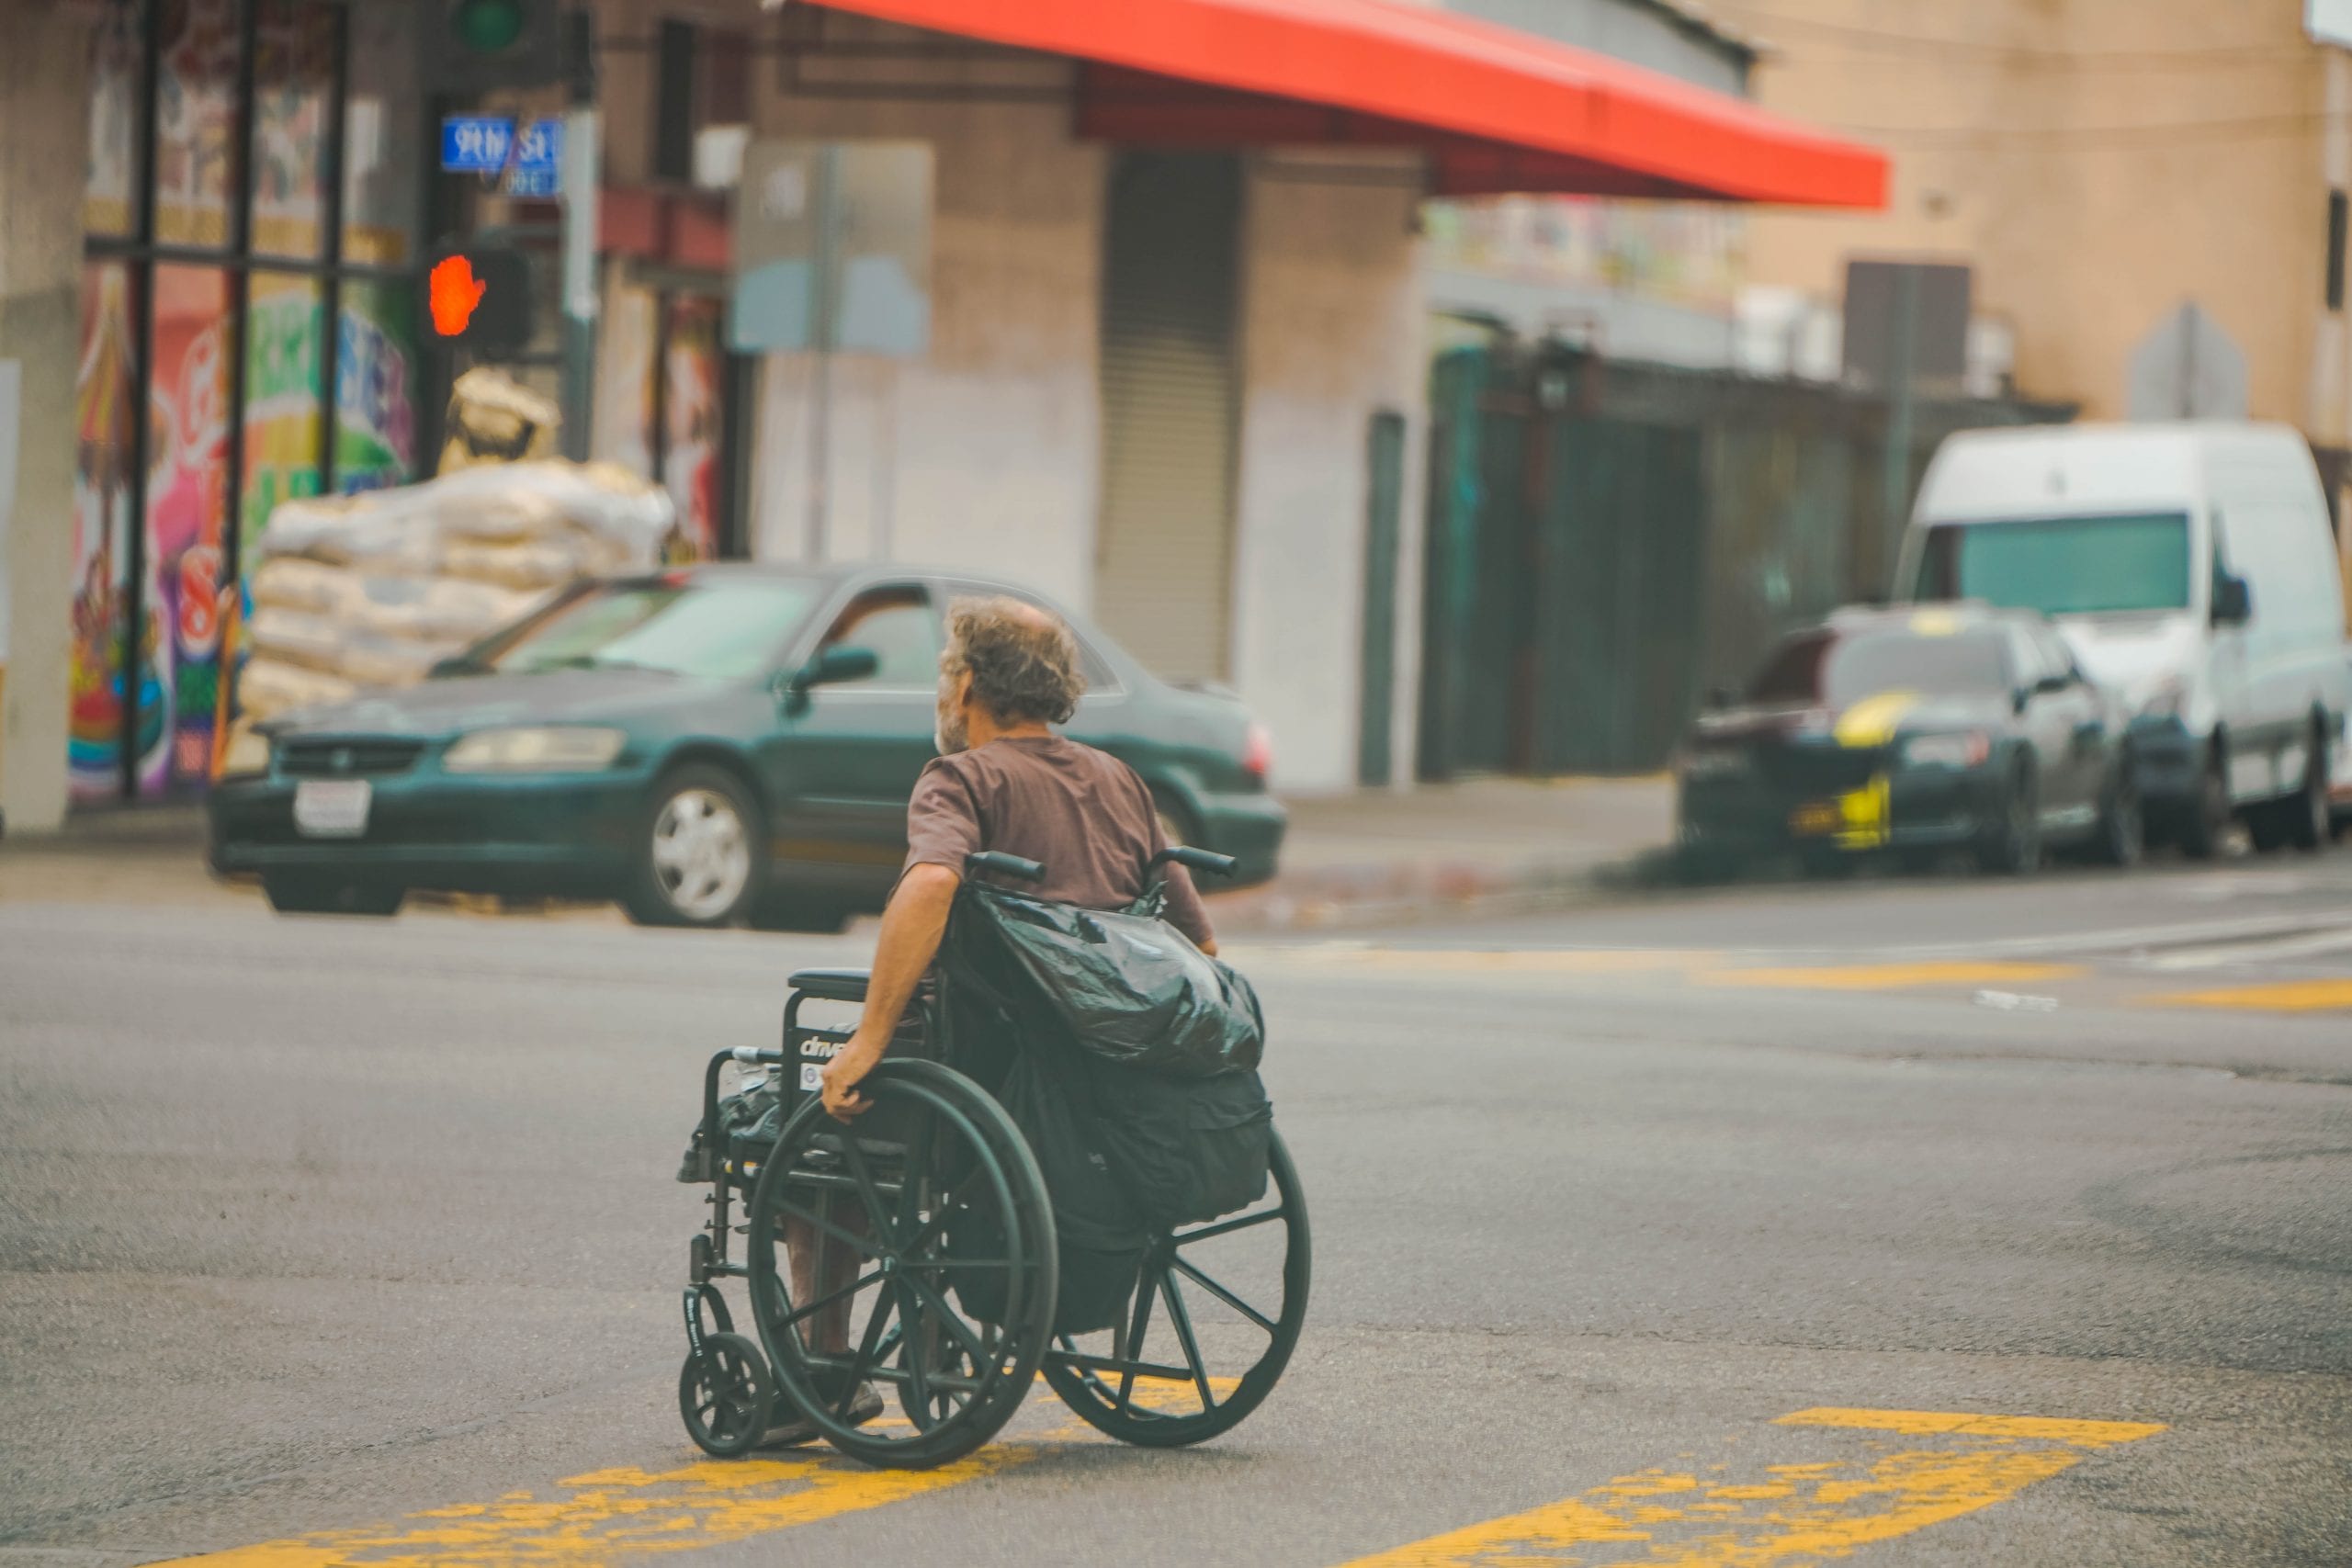 A man crossing the street in a wheelchair on a grey day